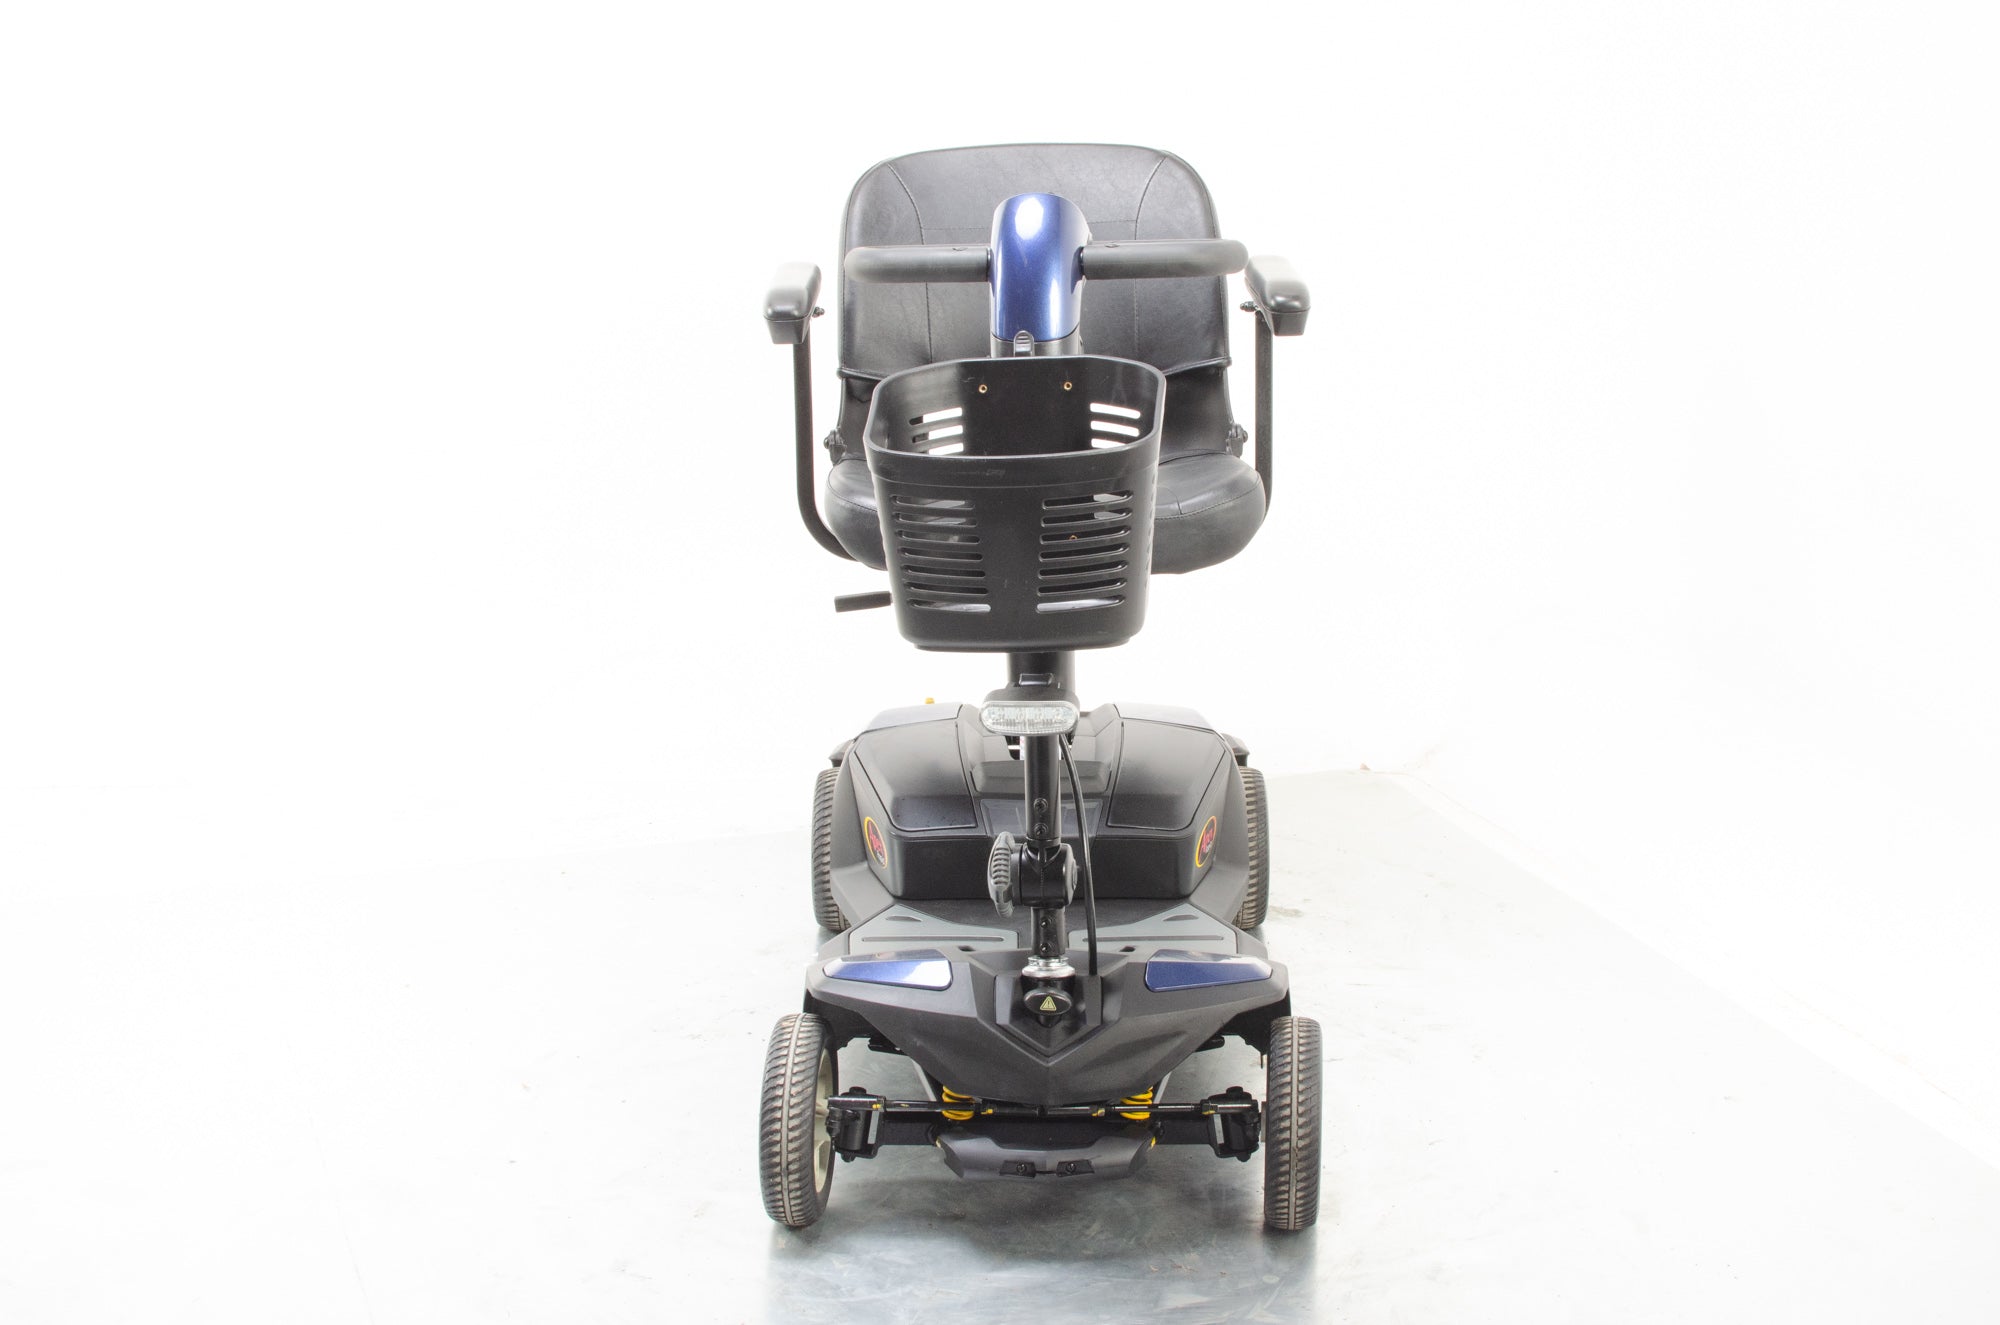 Pride Apex Rapid Used Electric Mobility Scooter Small Transportable Suspension Boot Portable